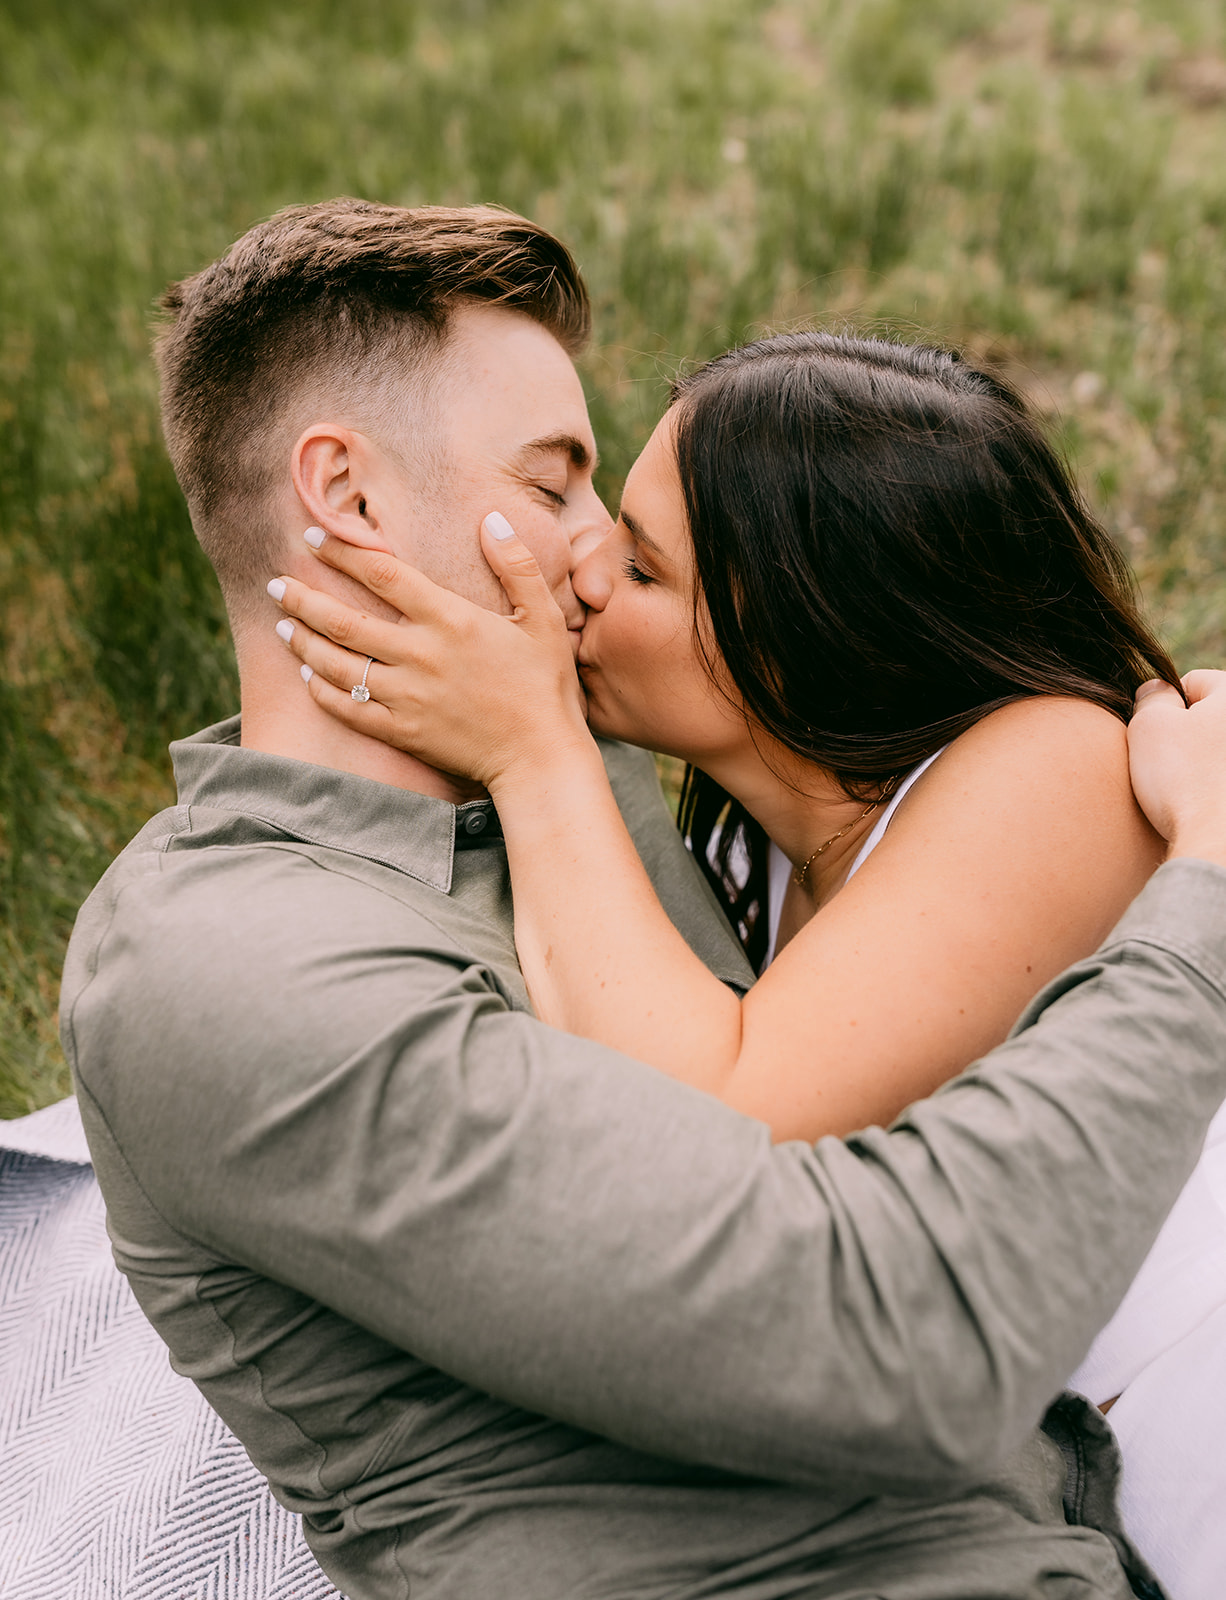 Hot Spring Engagement Session in the Mountains with Wildflowers